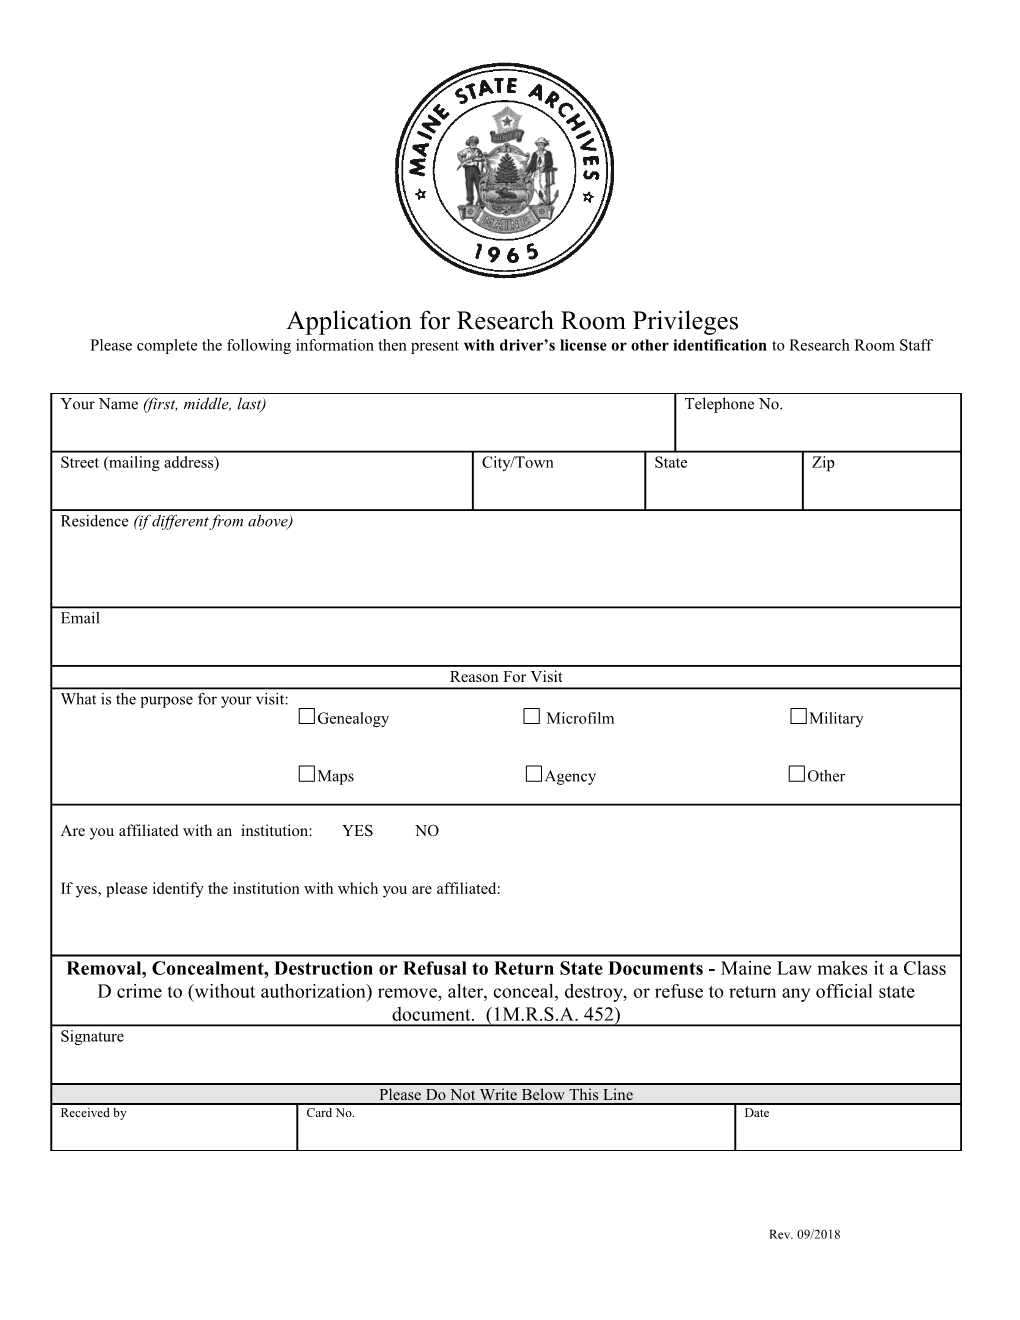 Maine State Archives , Archives Services Division Application for Research Room Privileges